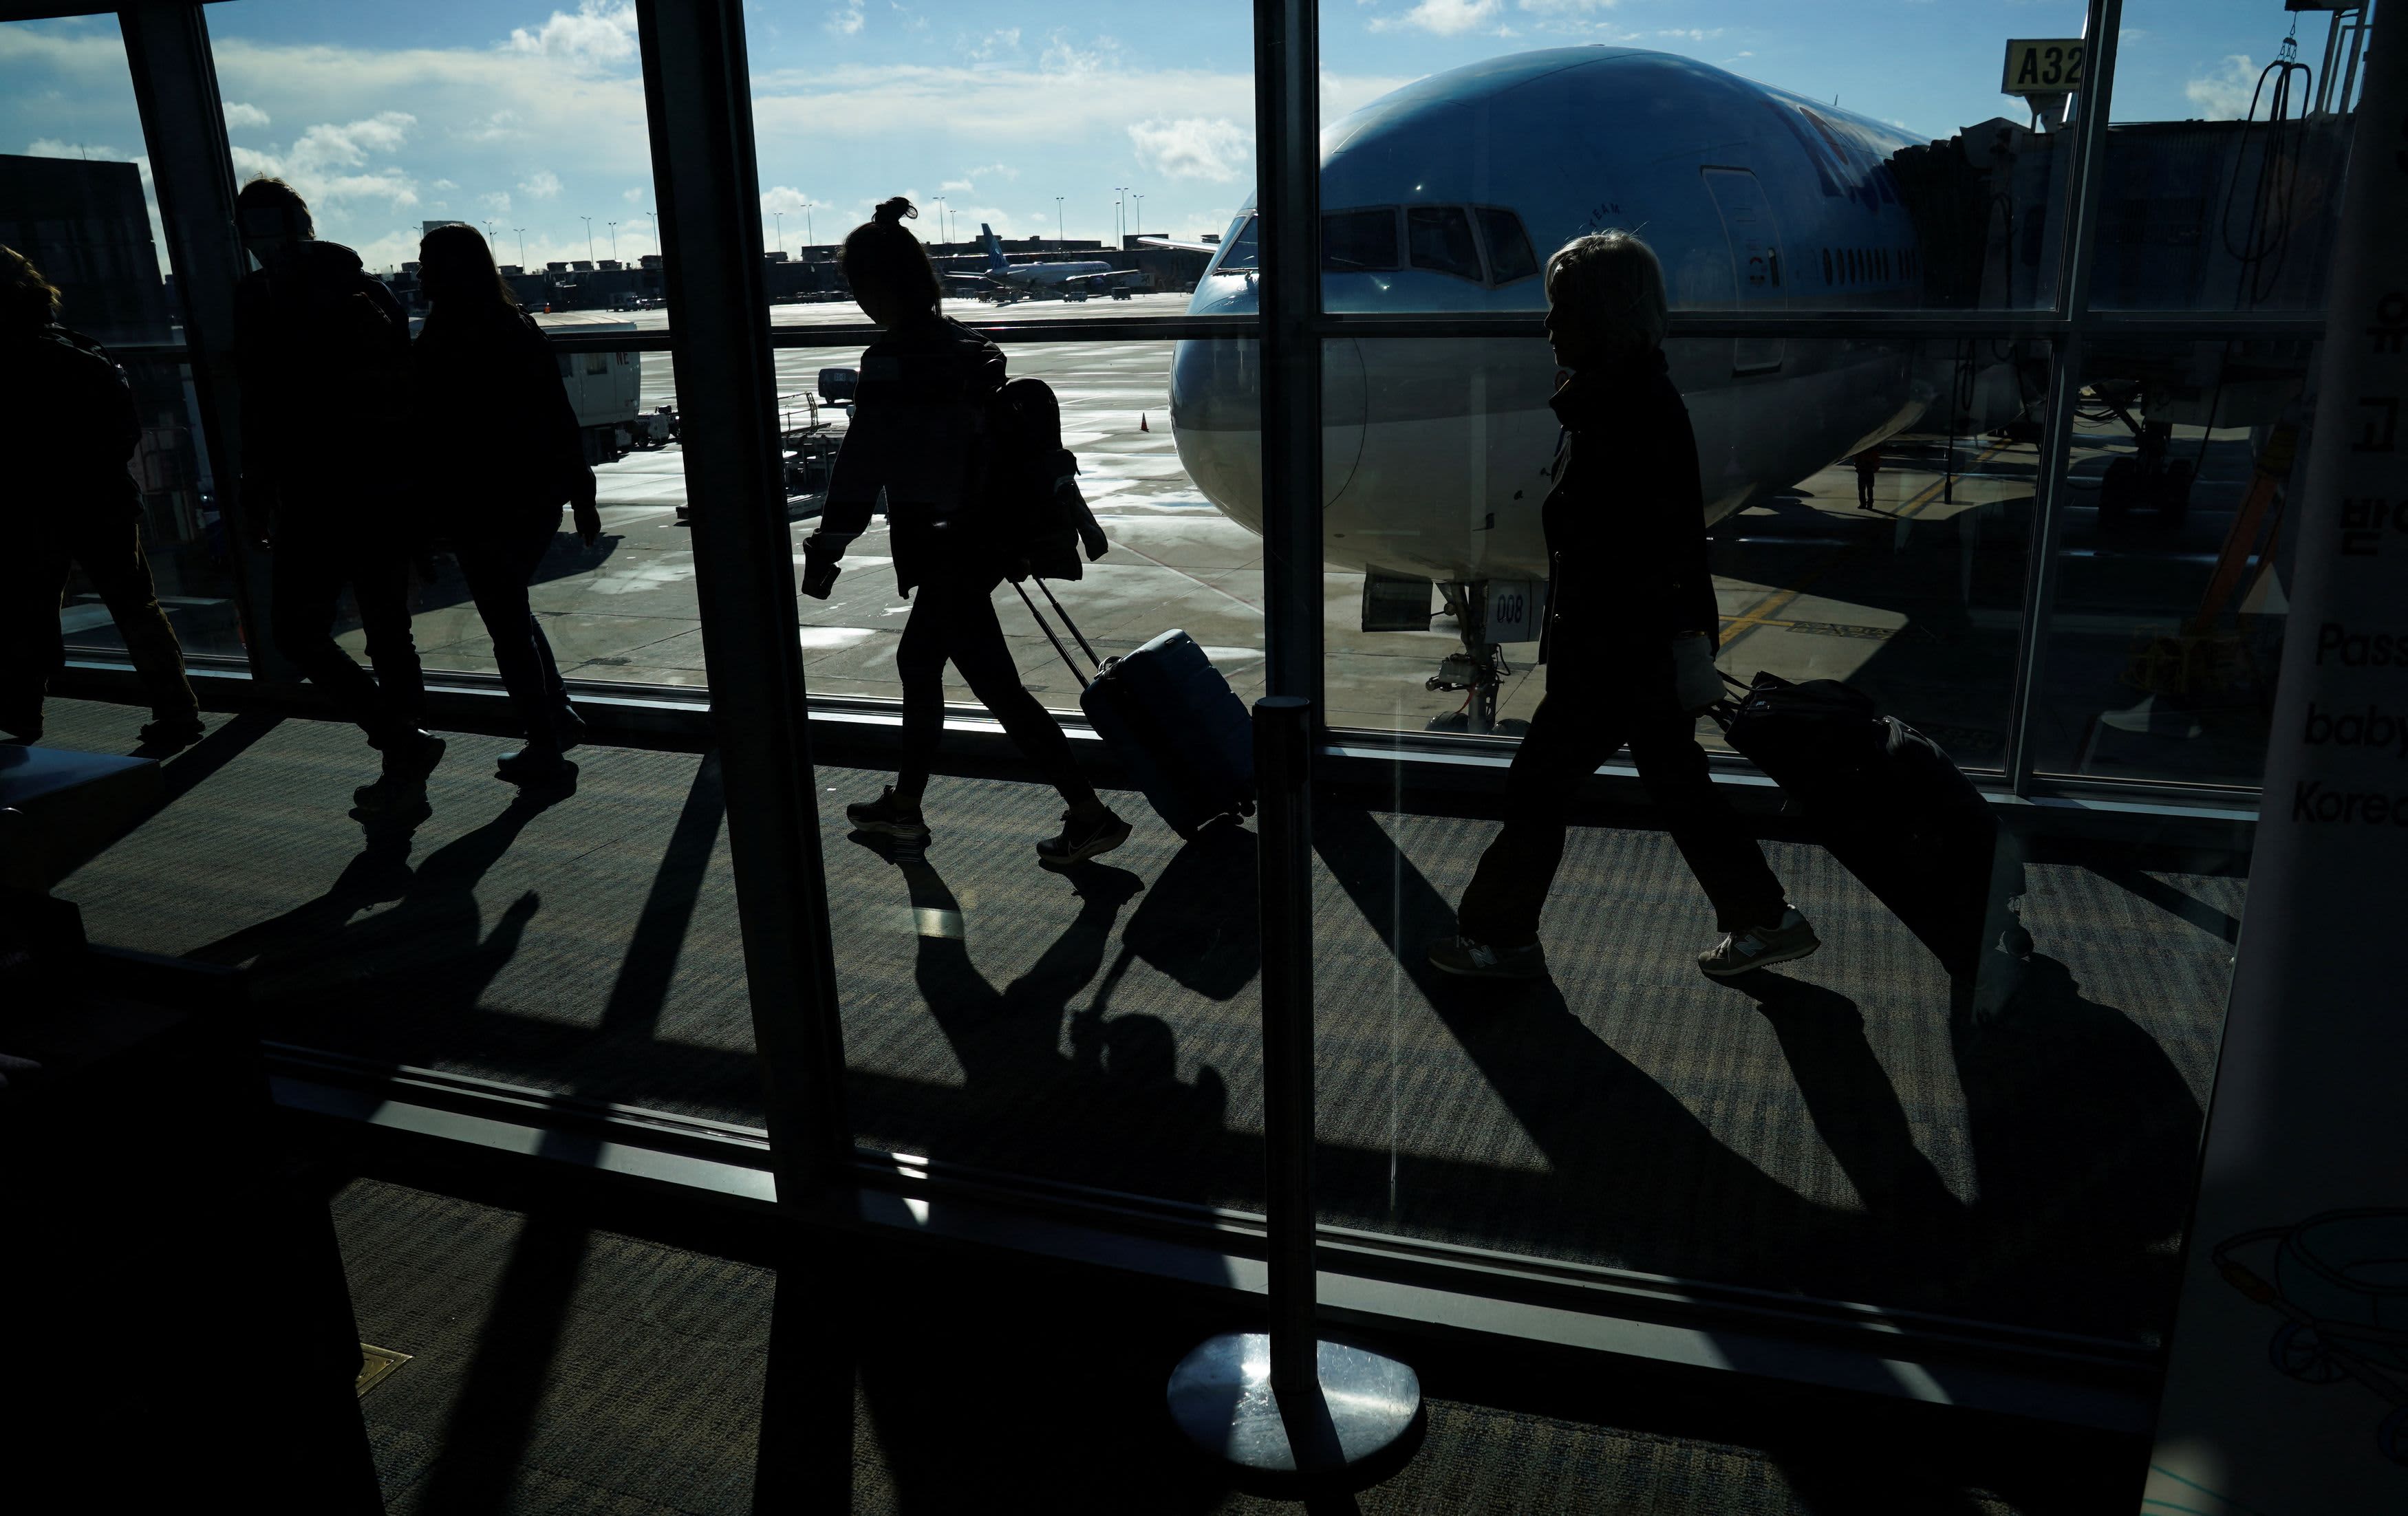 Airlines are cutting minutes off flight time thanks to new technology and faster boarding